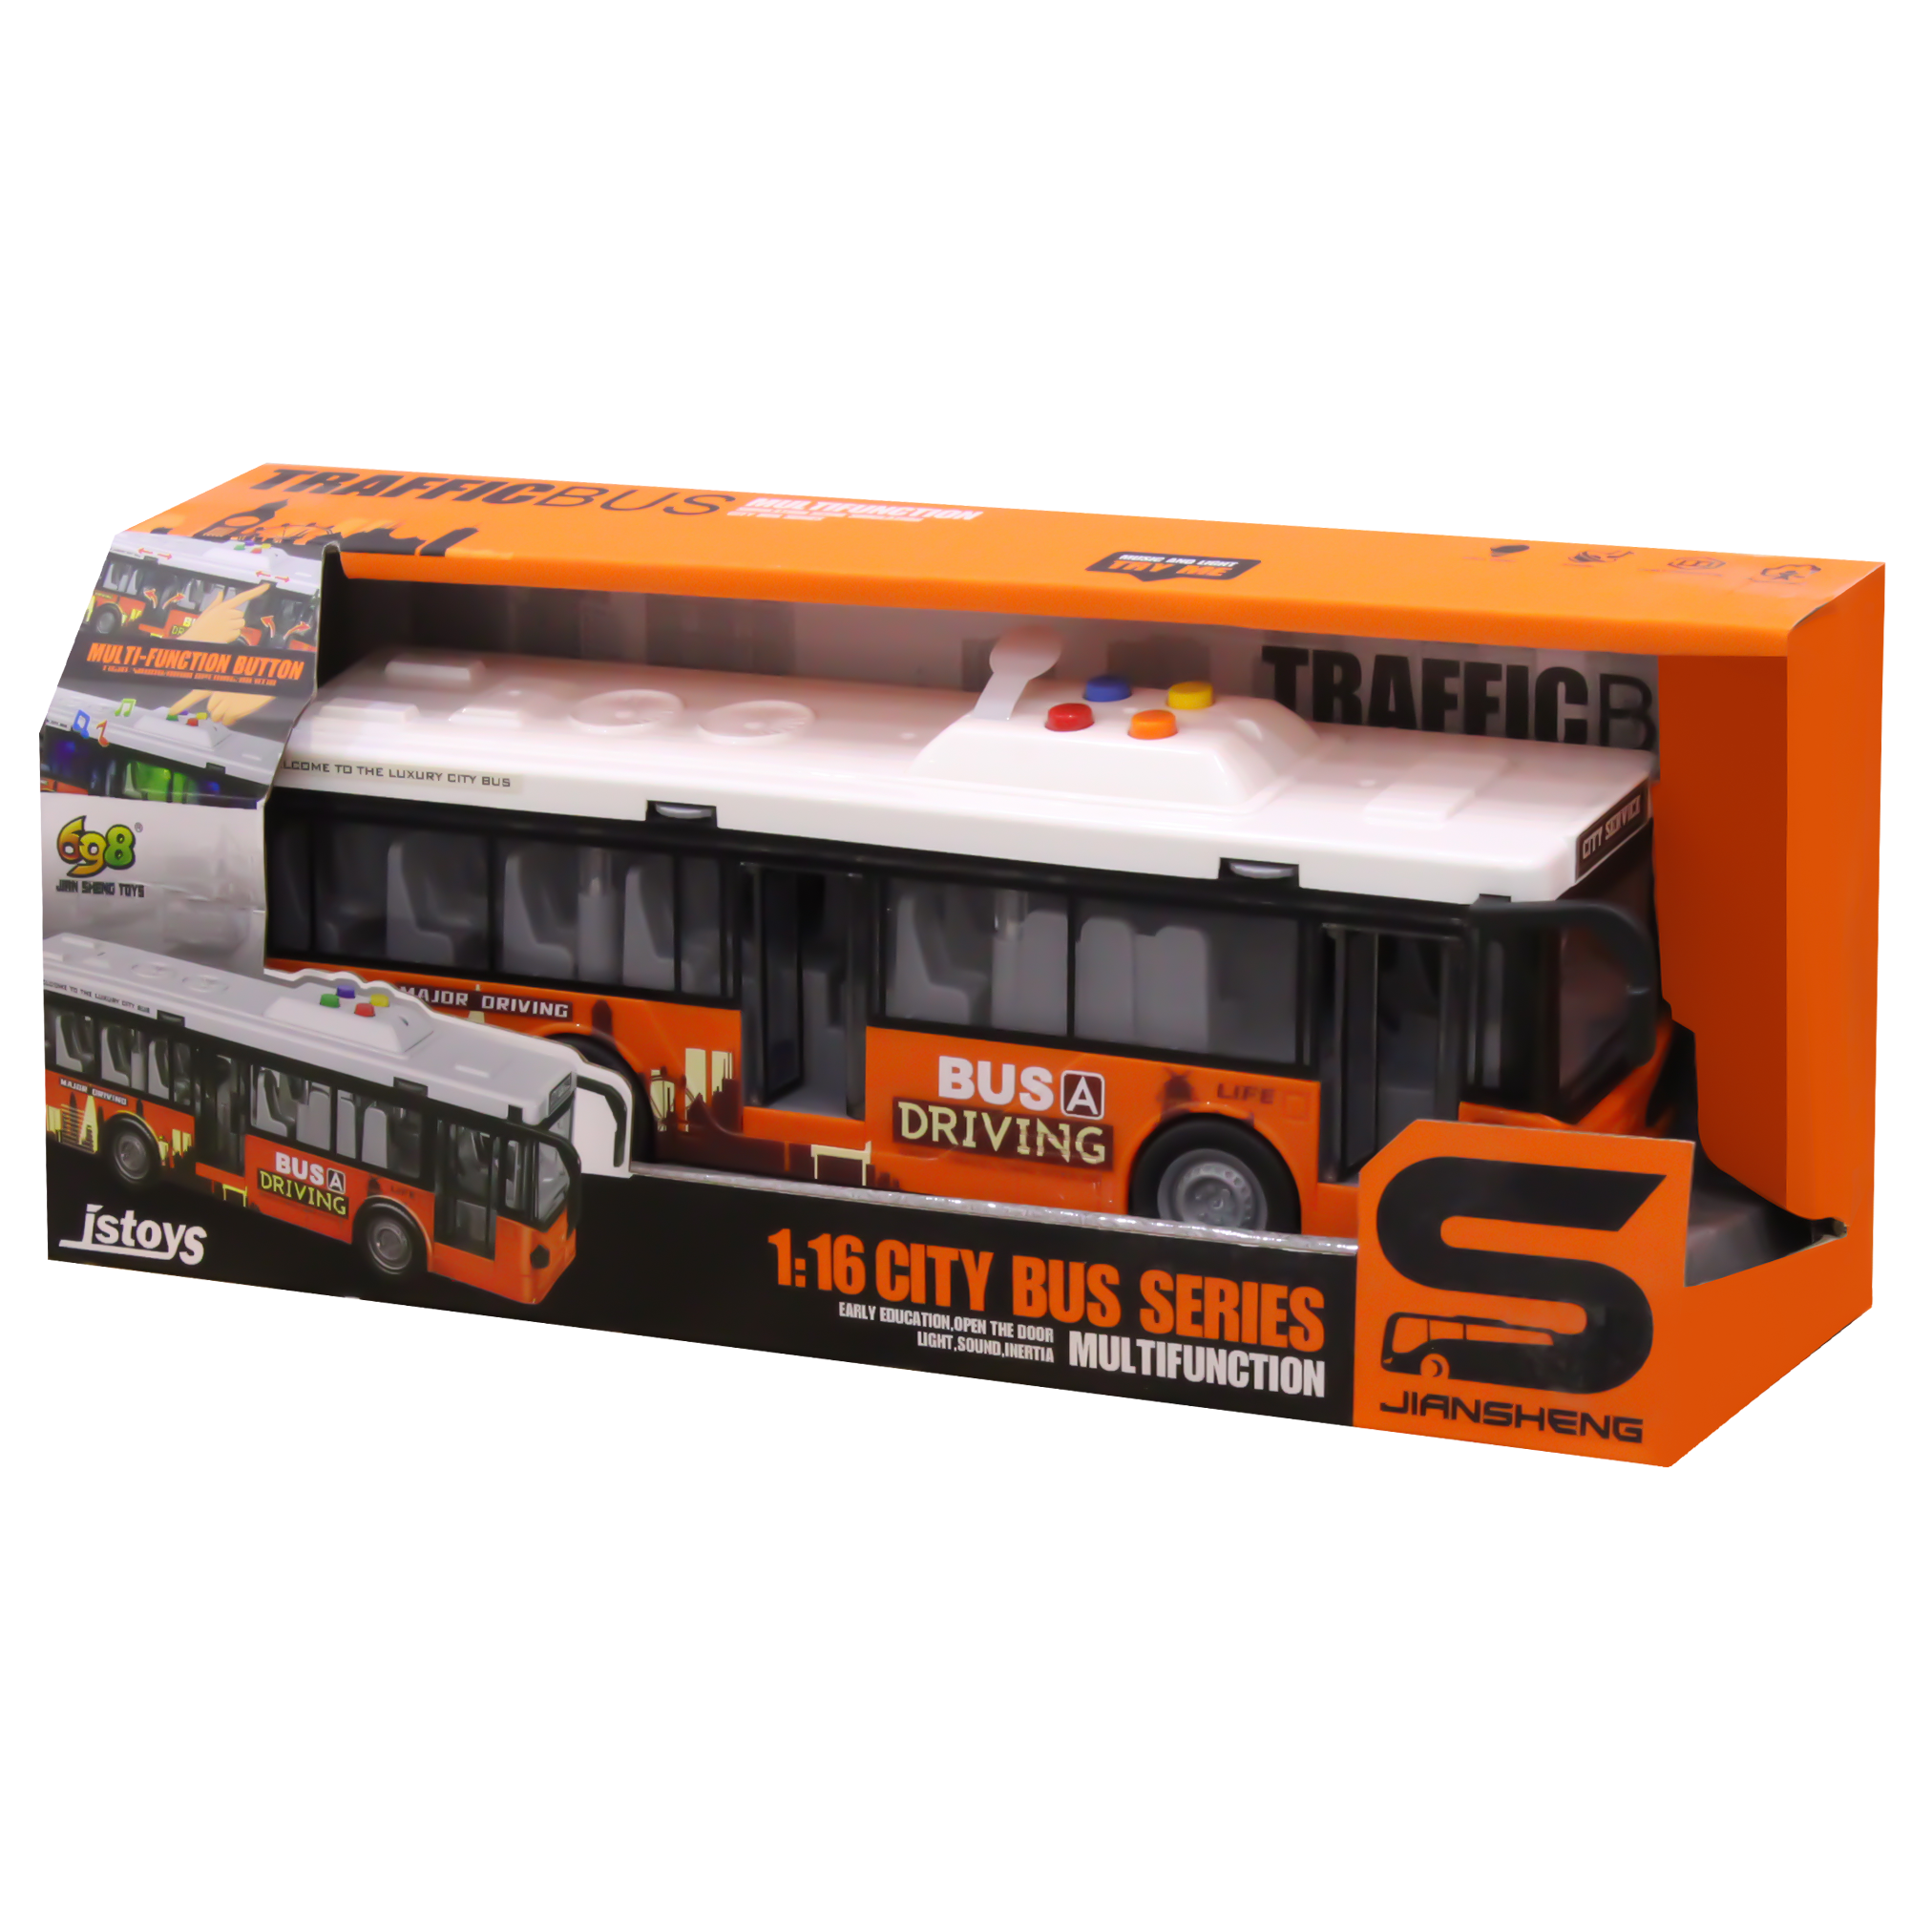 Jstoys 1:16 Toy City Bus Series with Sound and Light Doors Opening - Orange